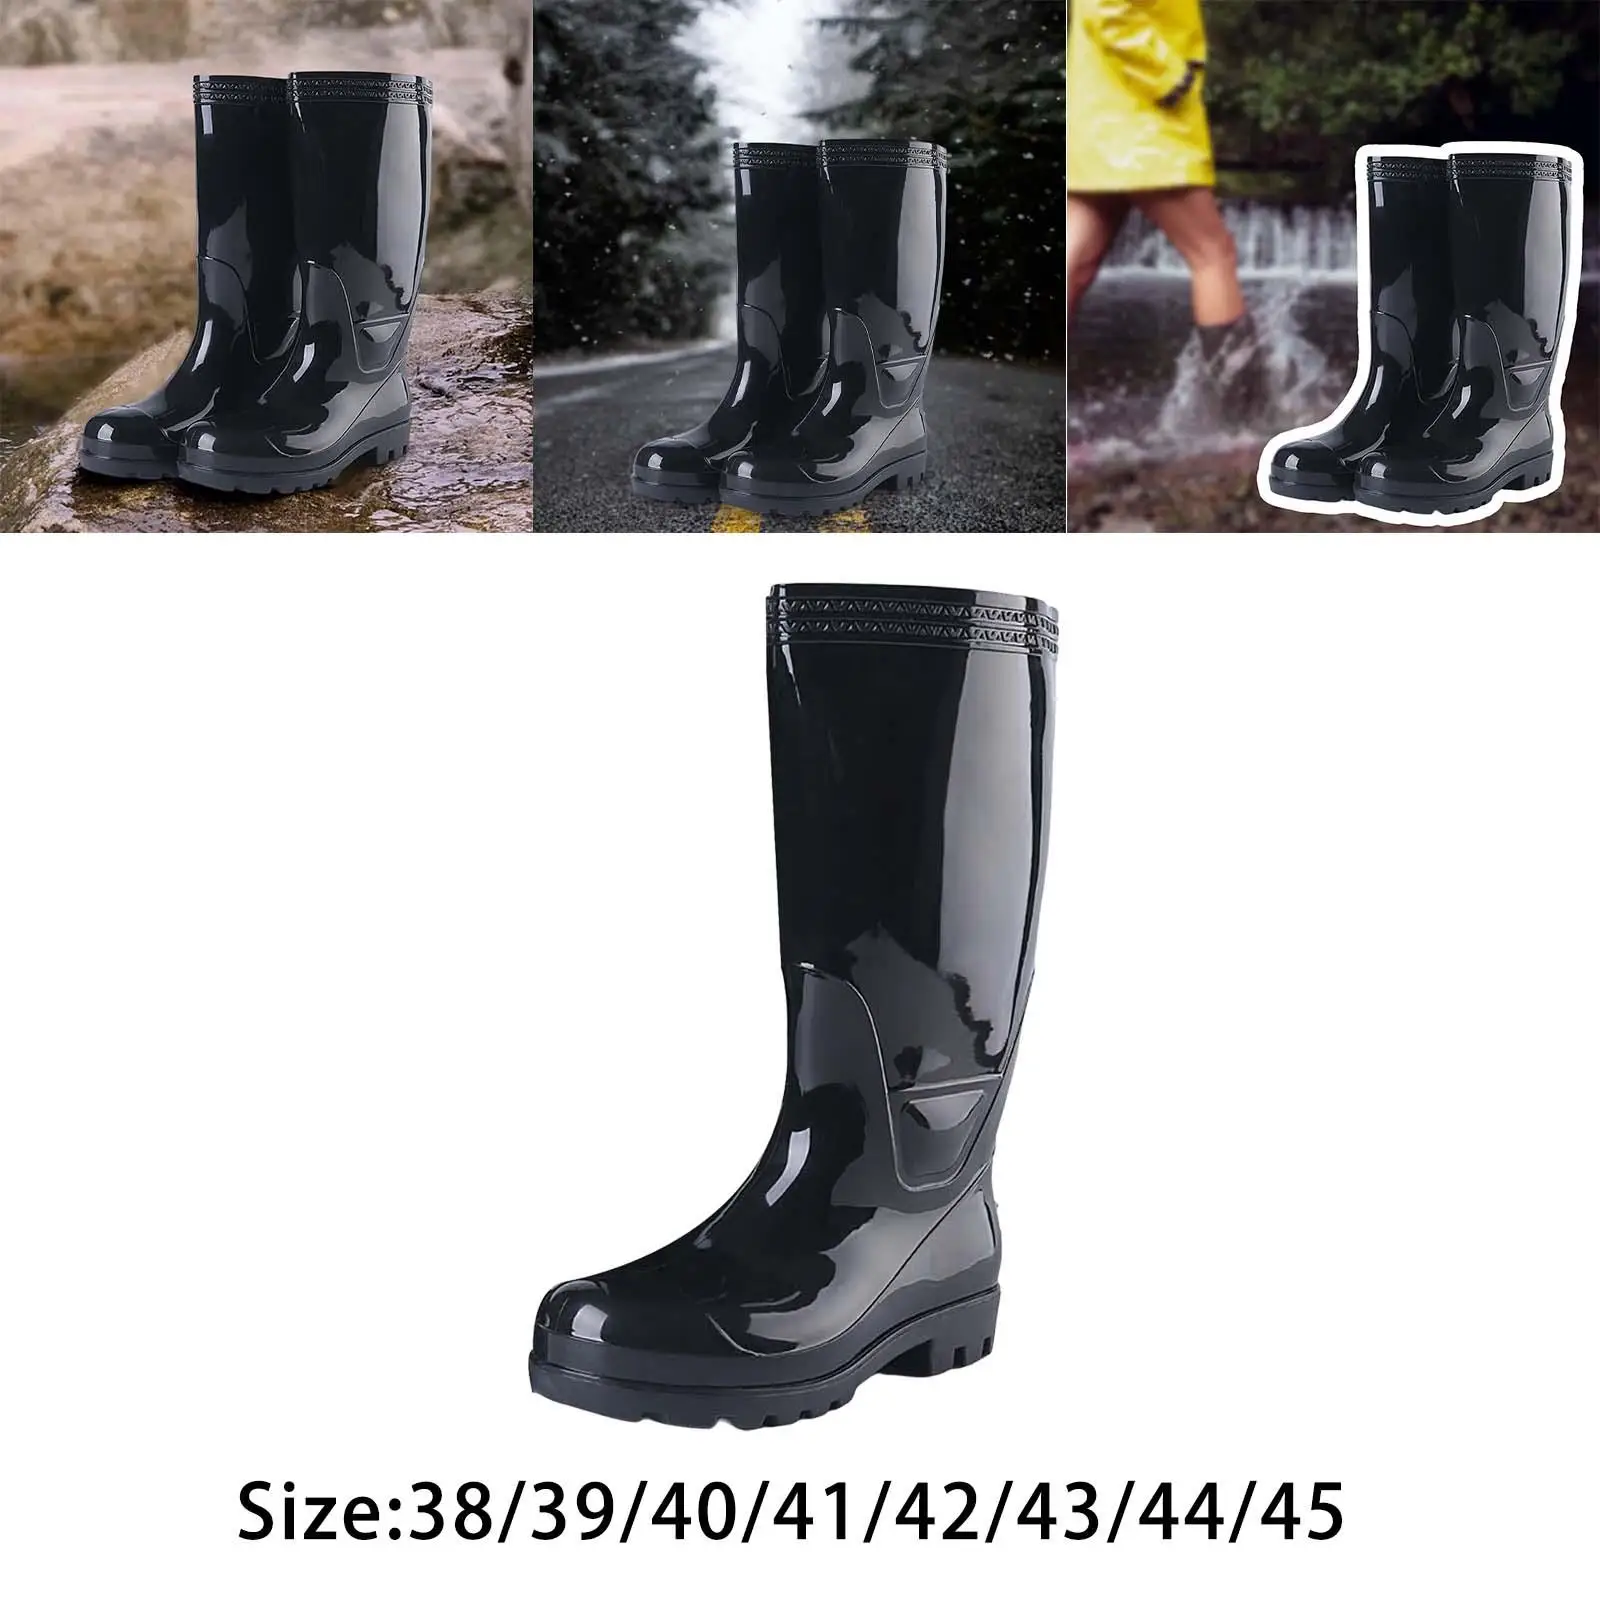 Rain Boots Steel Toe Rubber Boots for Men Anti Slip Knee High Boot Protective Footwear for Gardening Farming Industrial Working